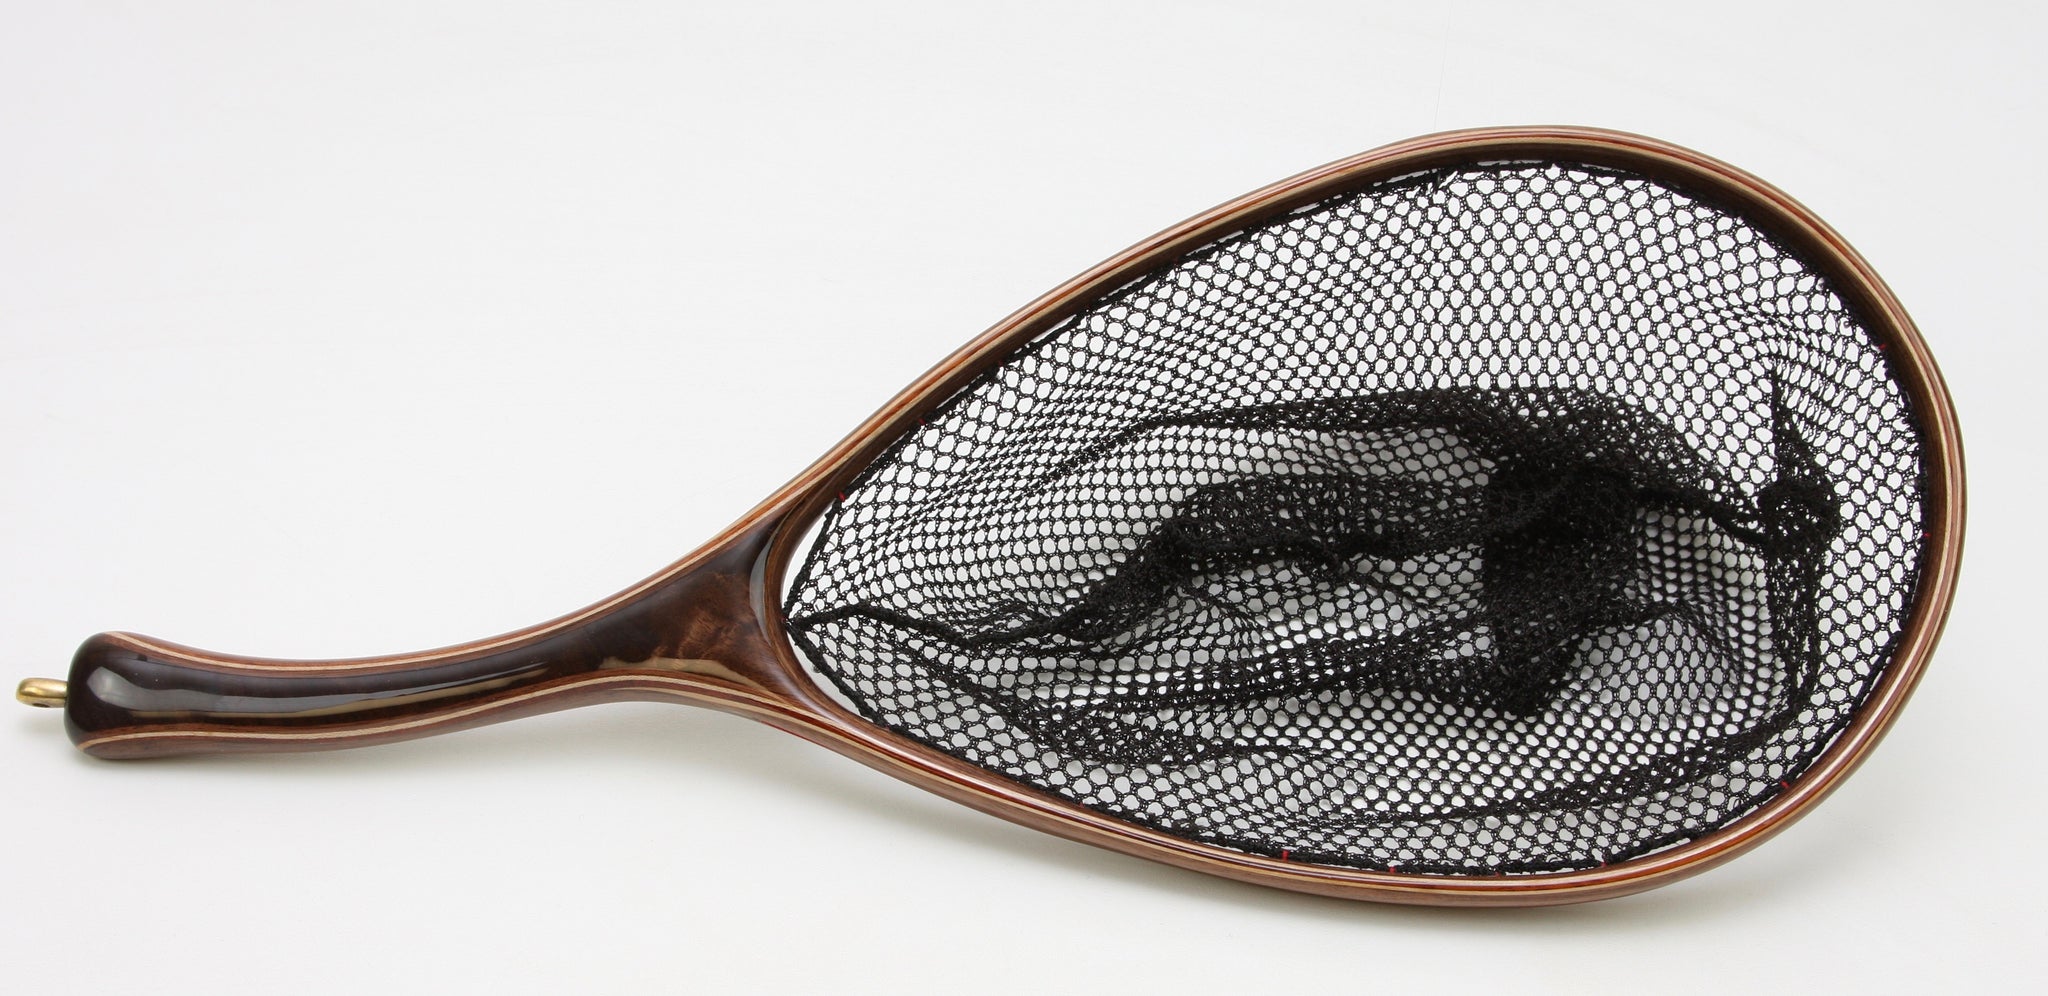 s/p Medium sized Fly Fishing Net, A trio of woods - Nets that Honor the Fish